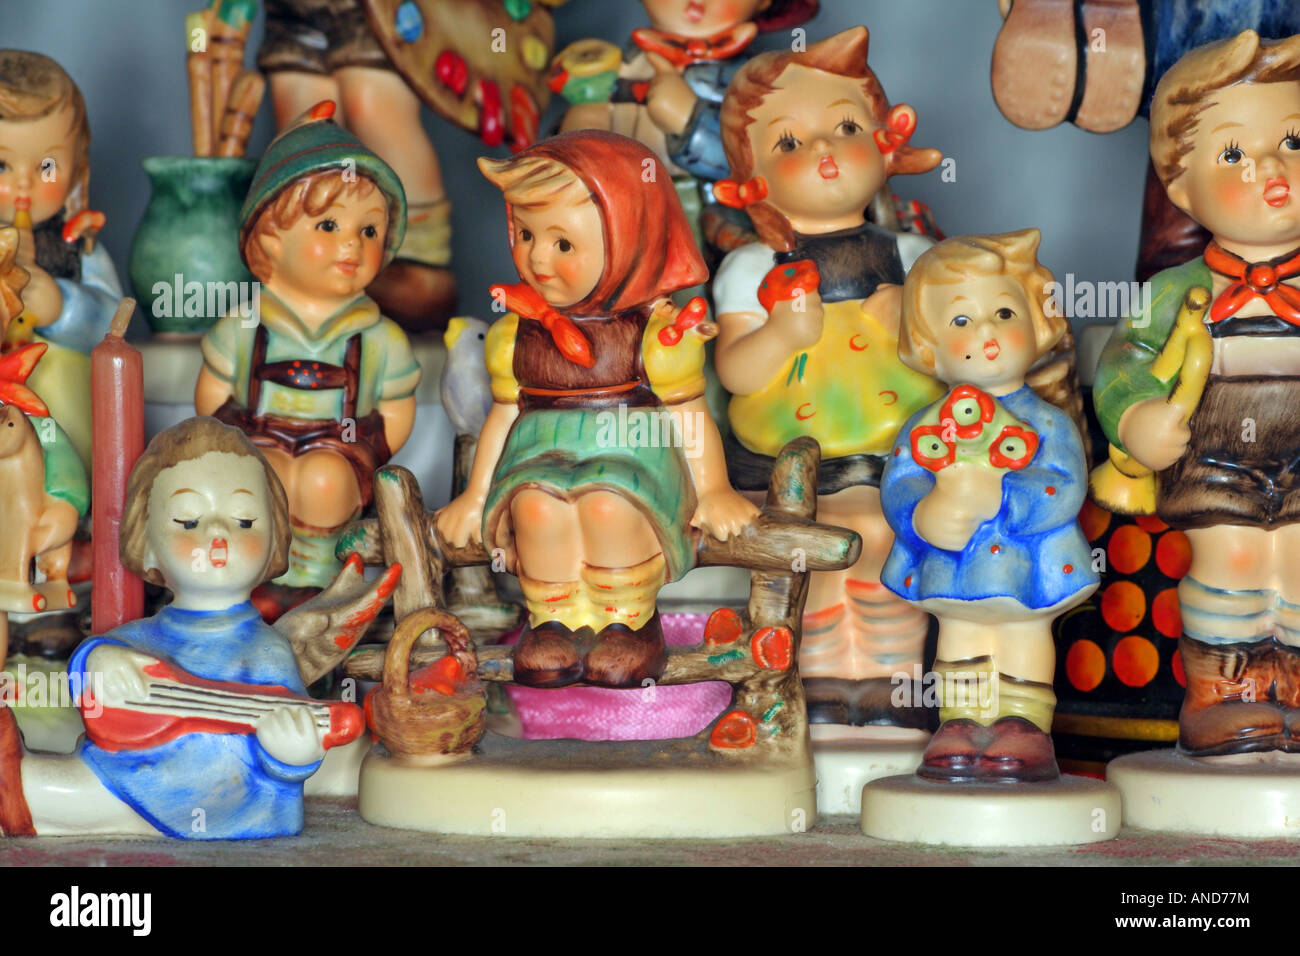 Hummel Figurines High Resolution Stock Photography and Images - Alamy